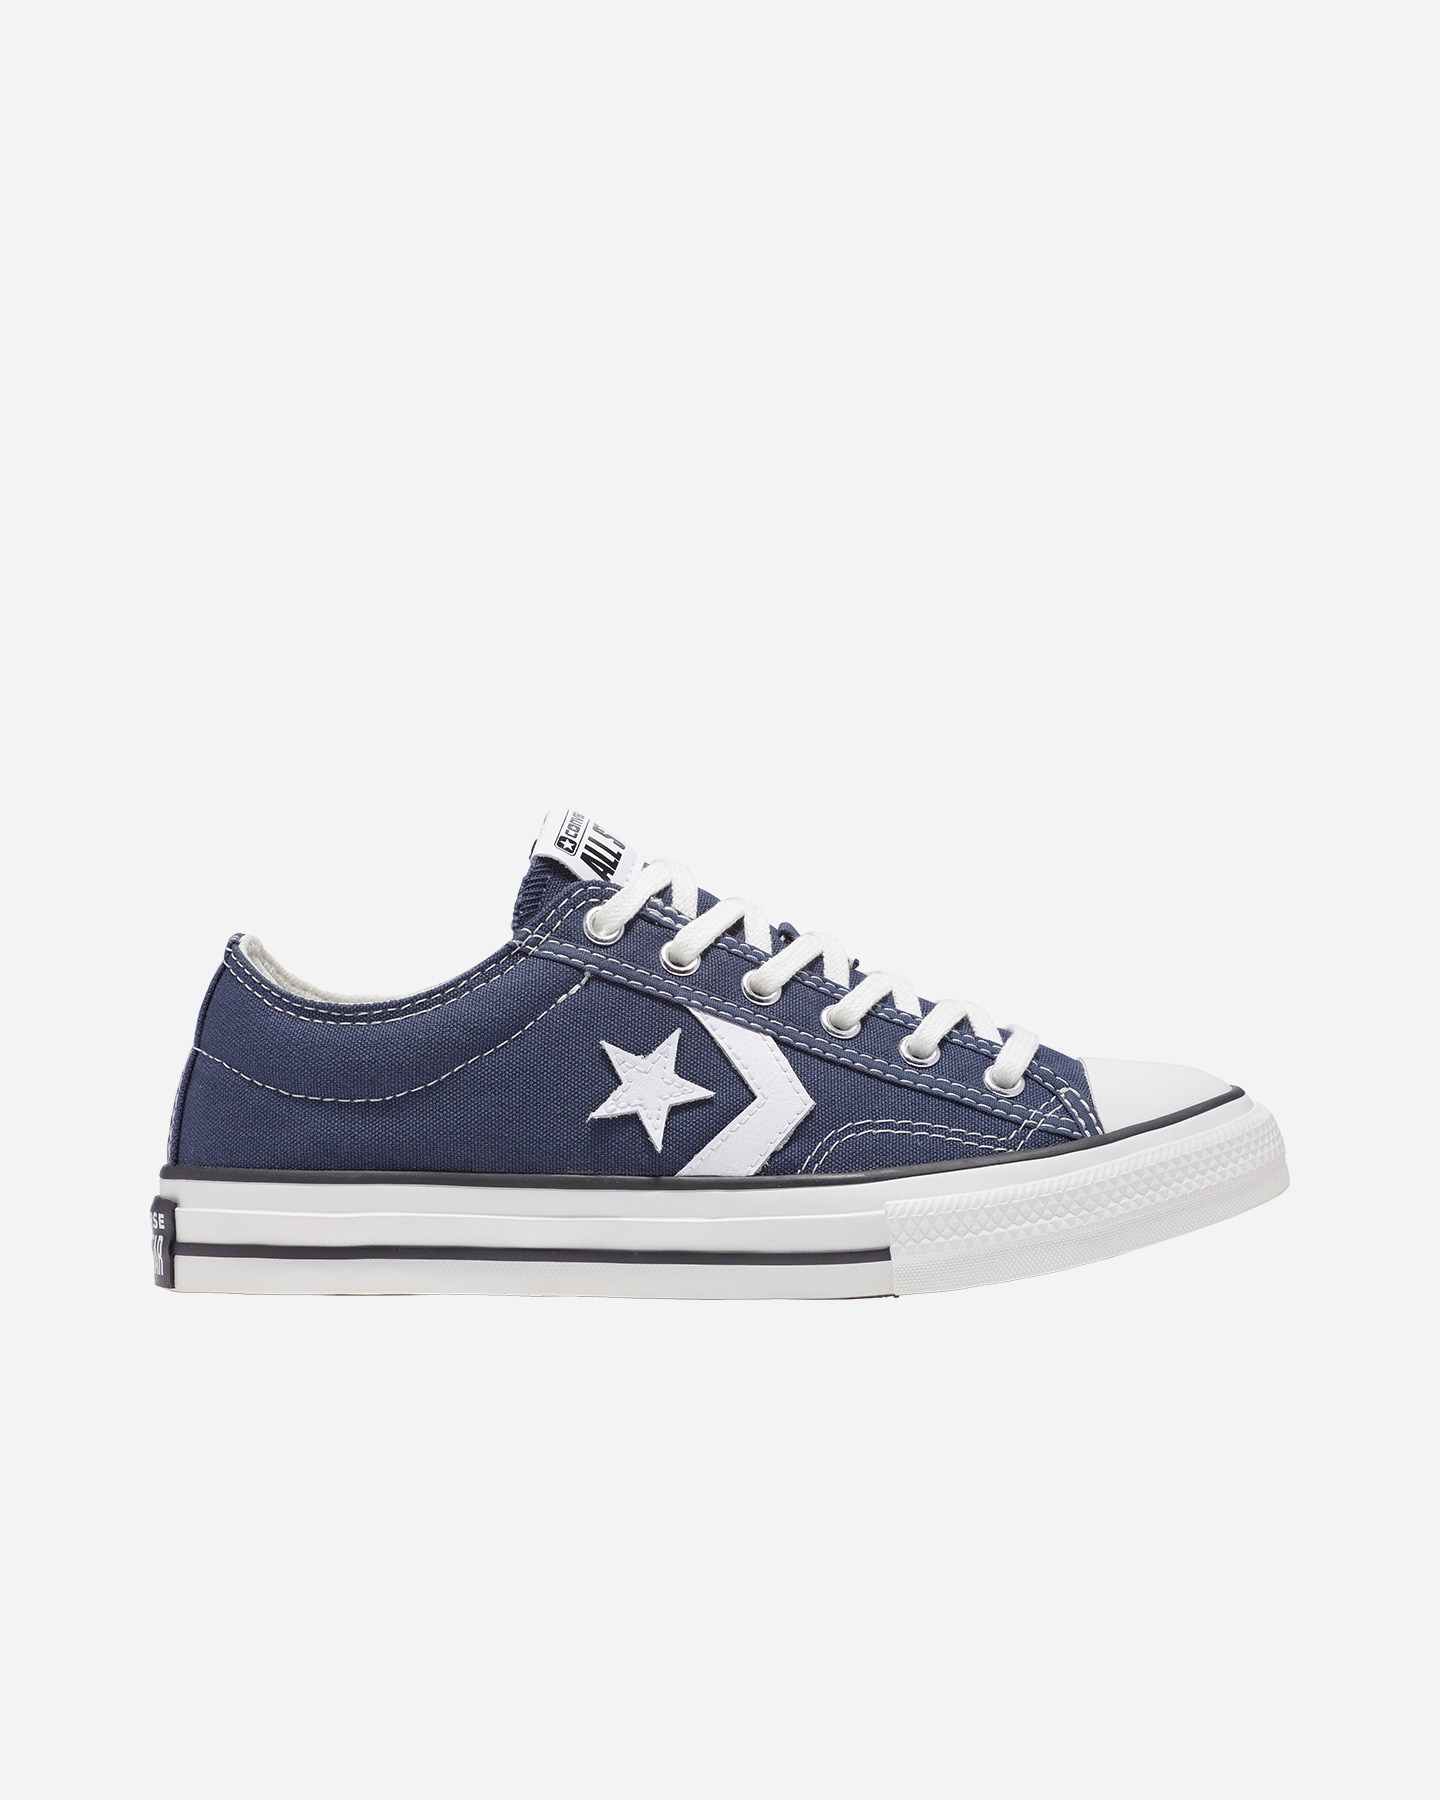 Image of Converse Star Player 76 3v Gs Jr - Scarpe Sneakers